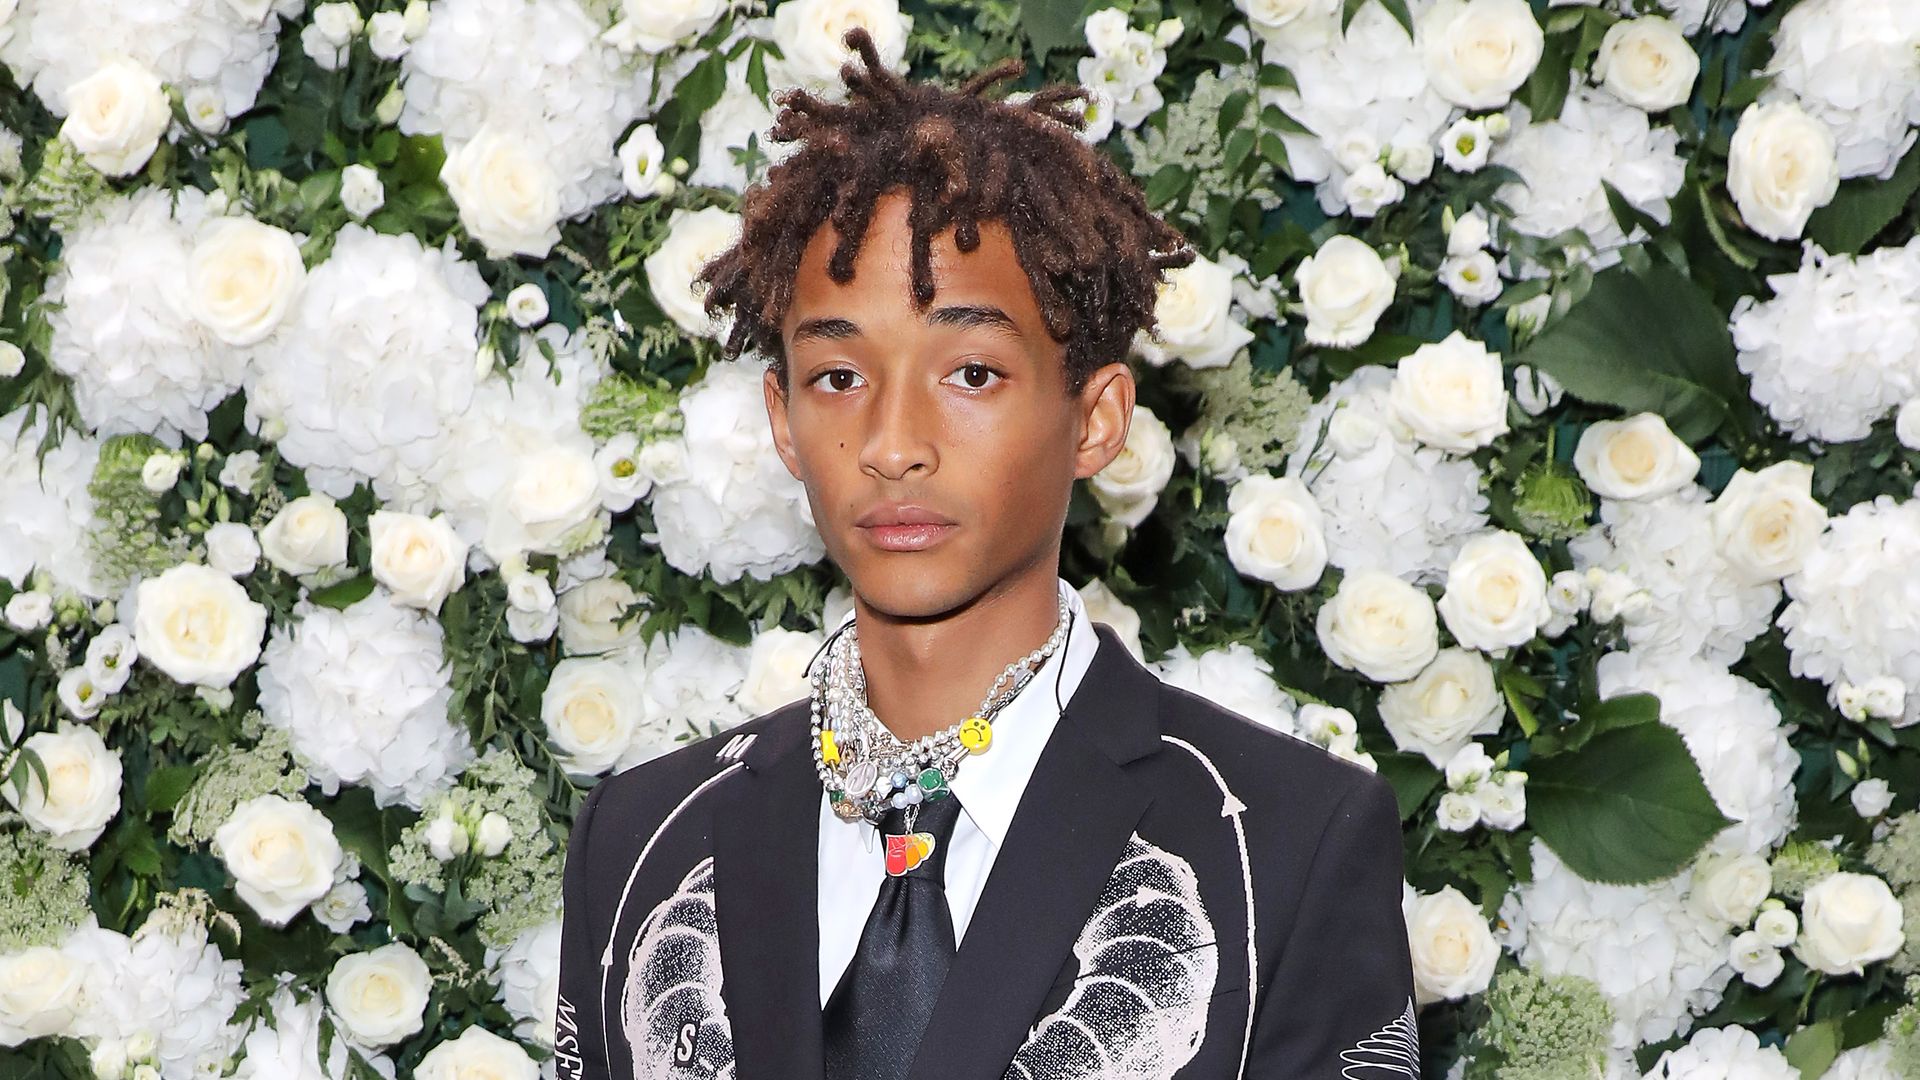 Jaden Smith during London Fashion Week on September 20, 2021 in London, England